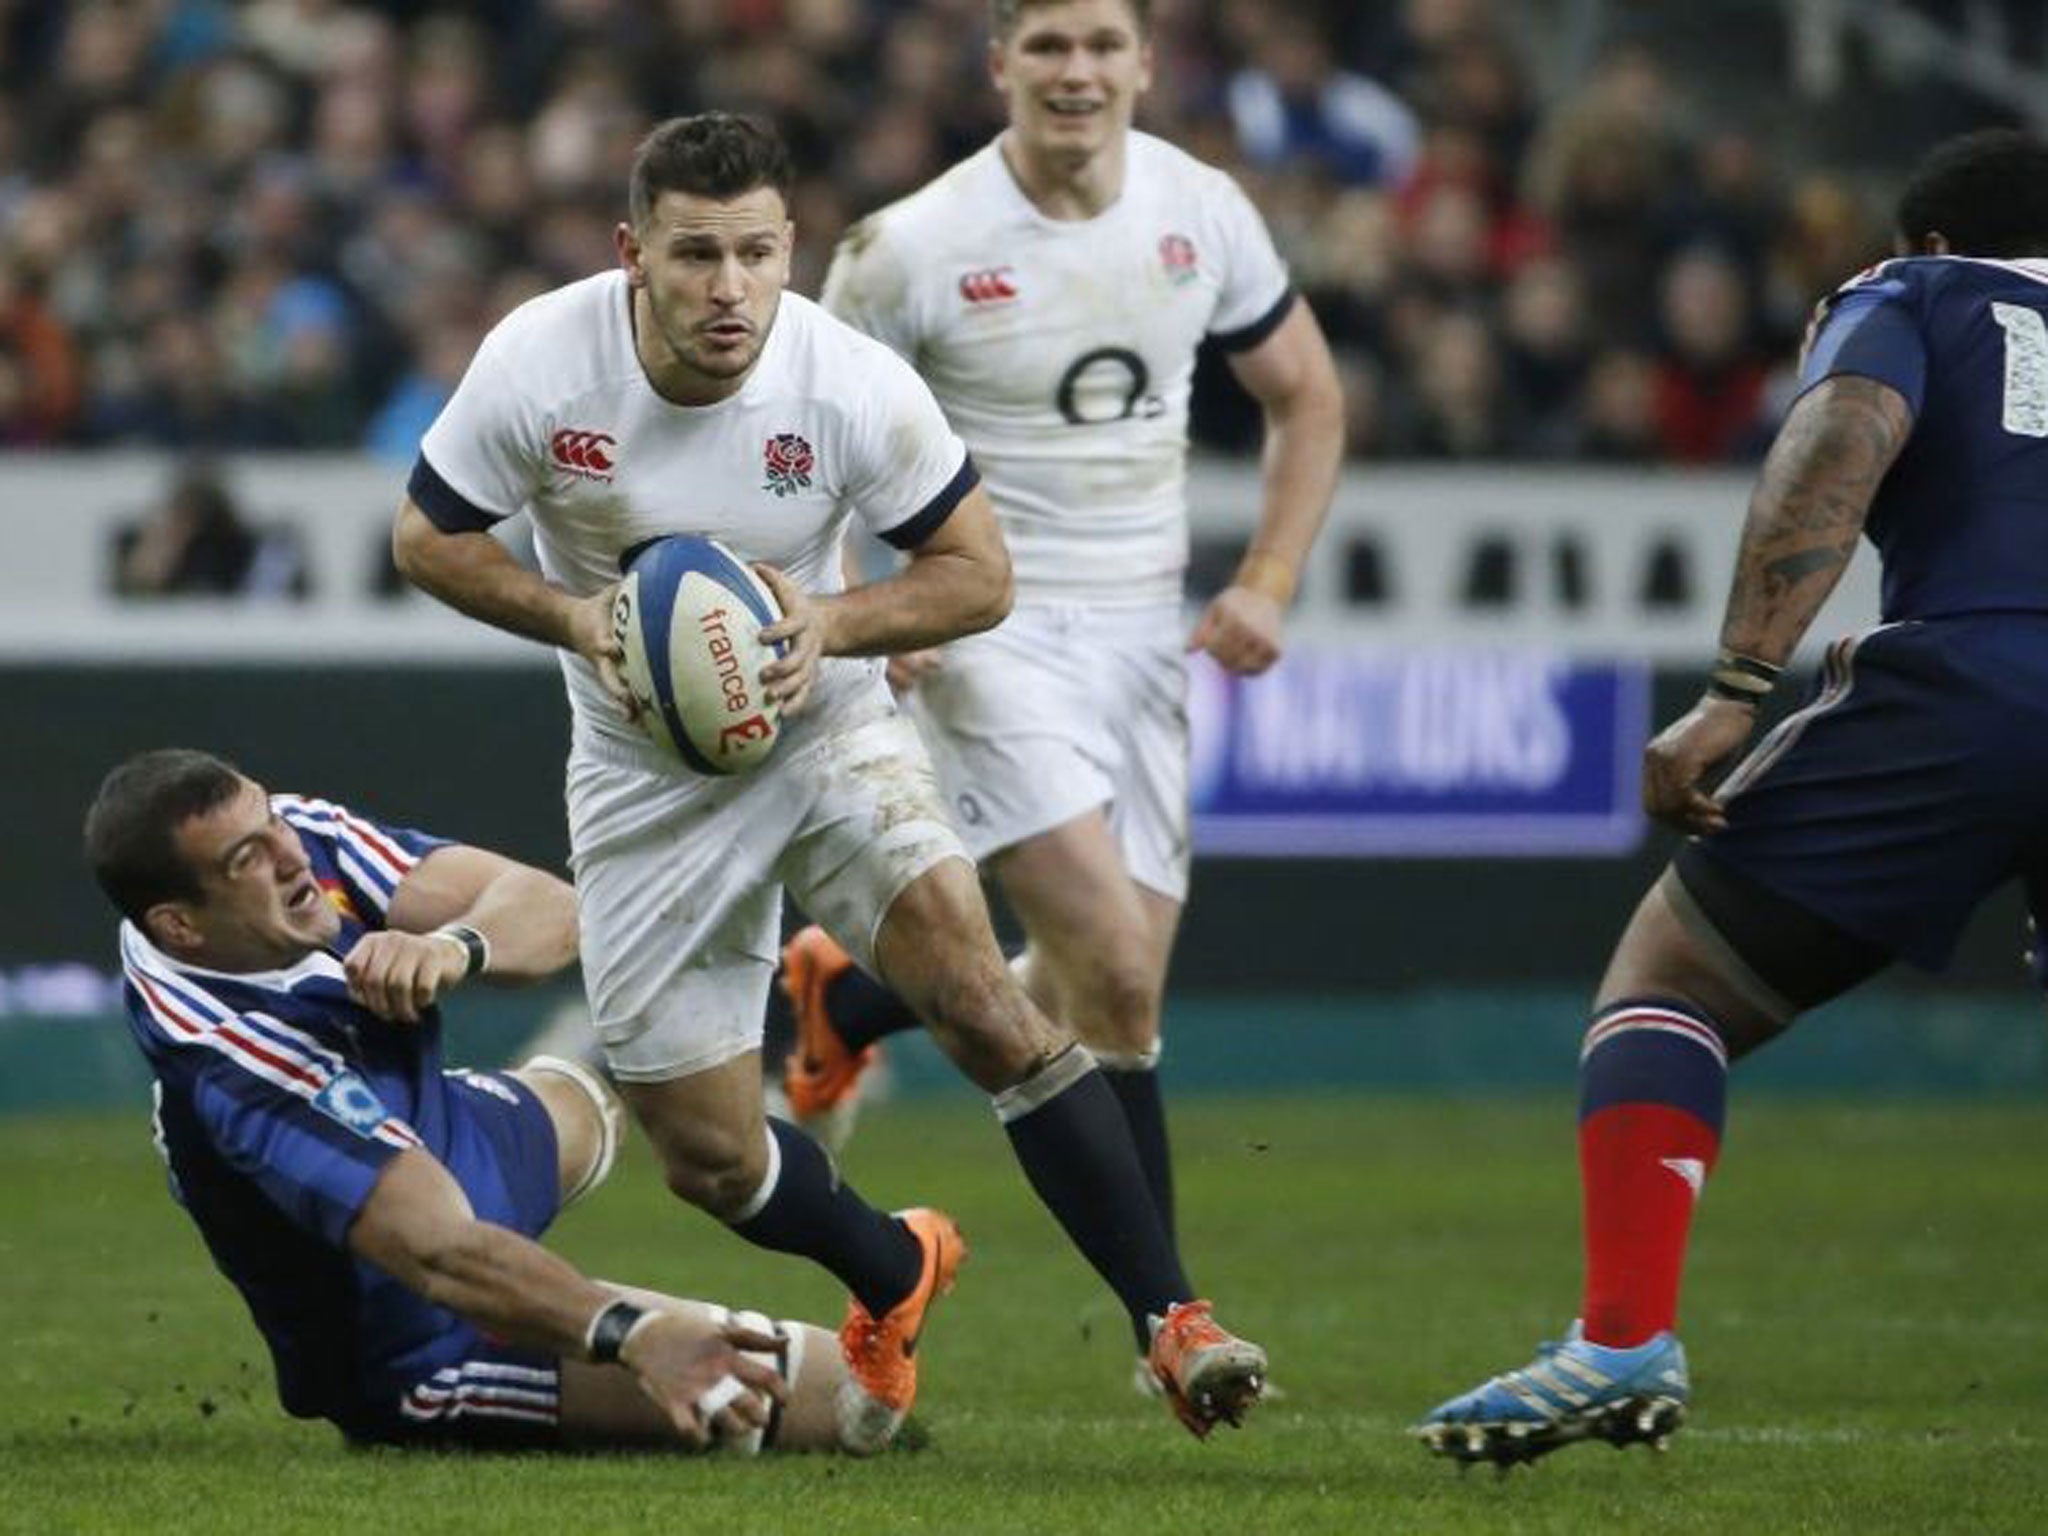 Replacing Danny Care (above) with Lee Dickson against France was criticised in some quarters